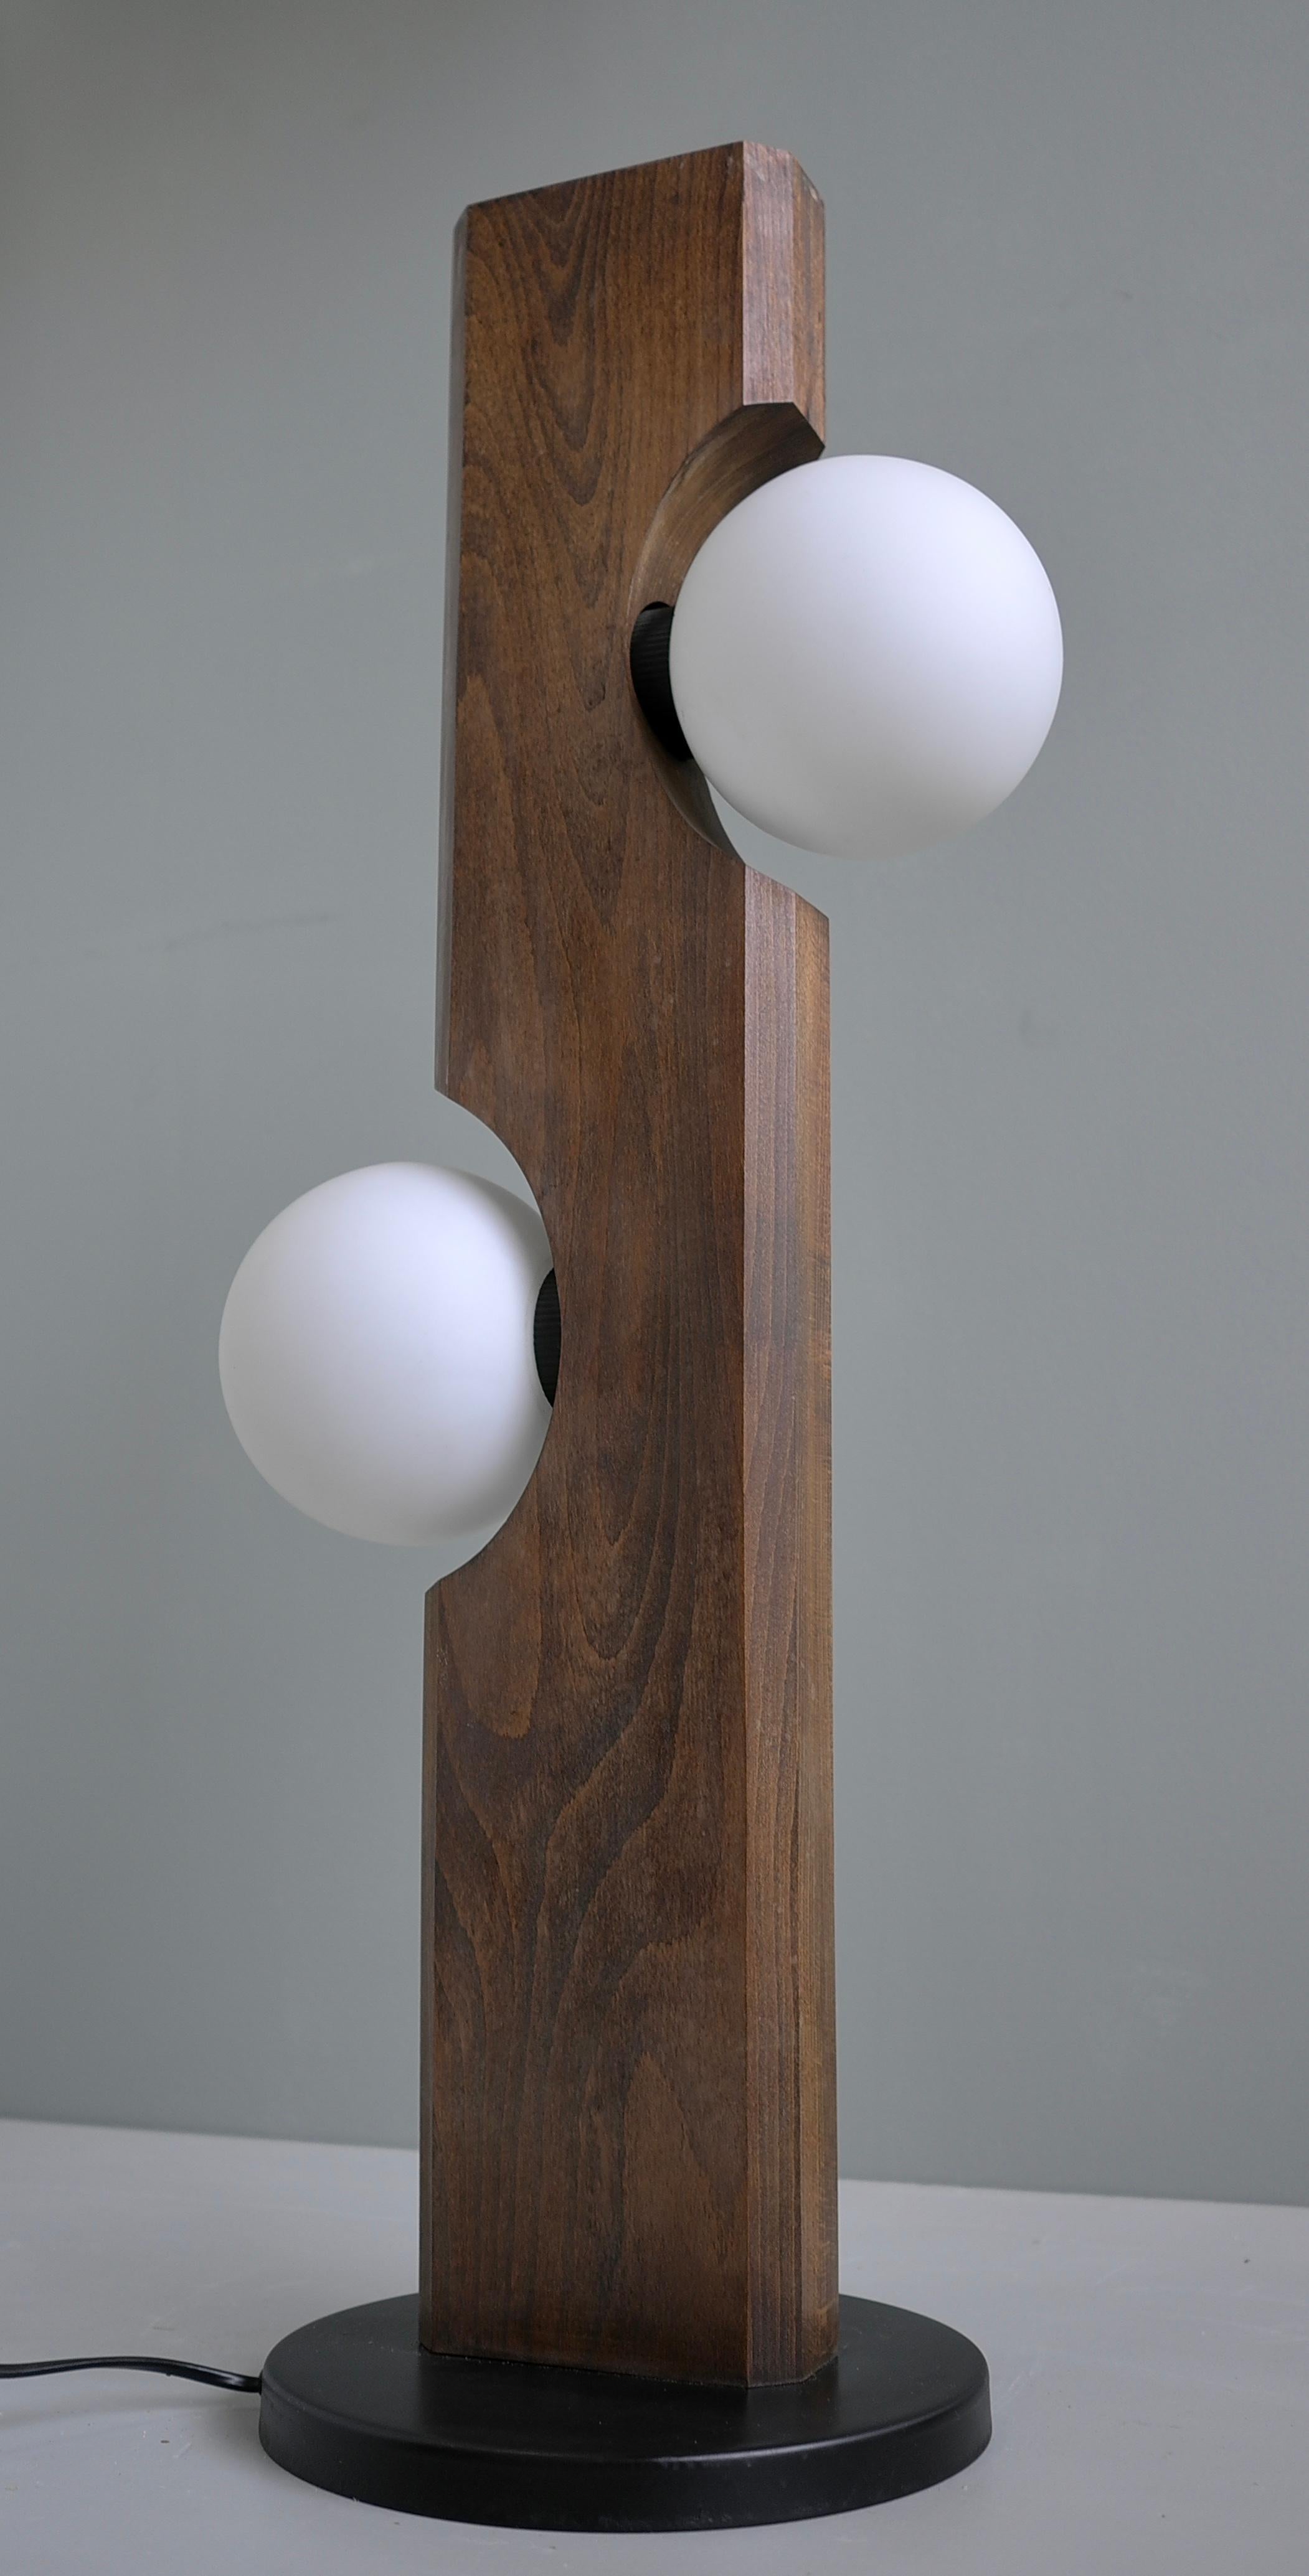 Temde Leuchten Floor or Table Lamp in Wood with White Glass Balls, Germany 1969 For Sale 5